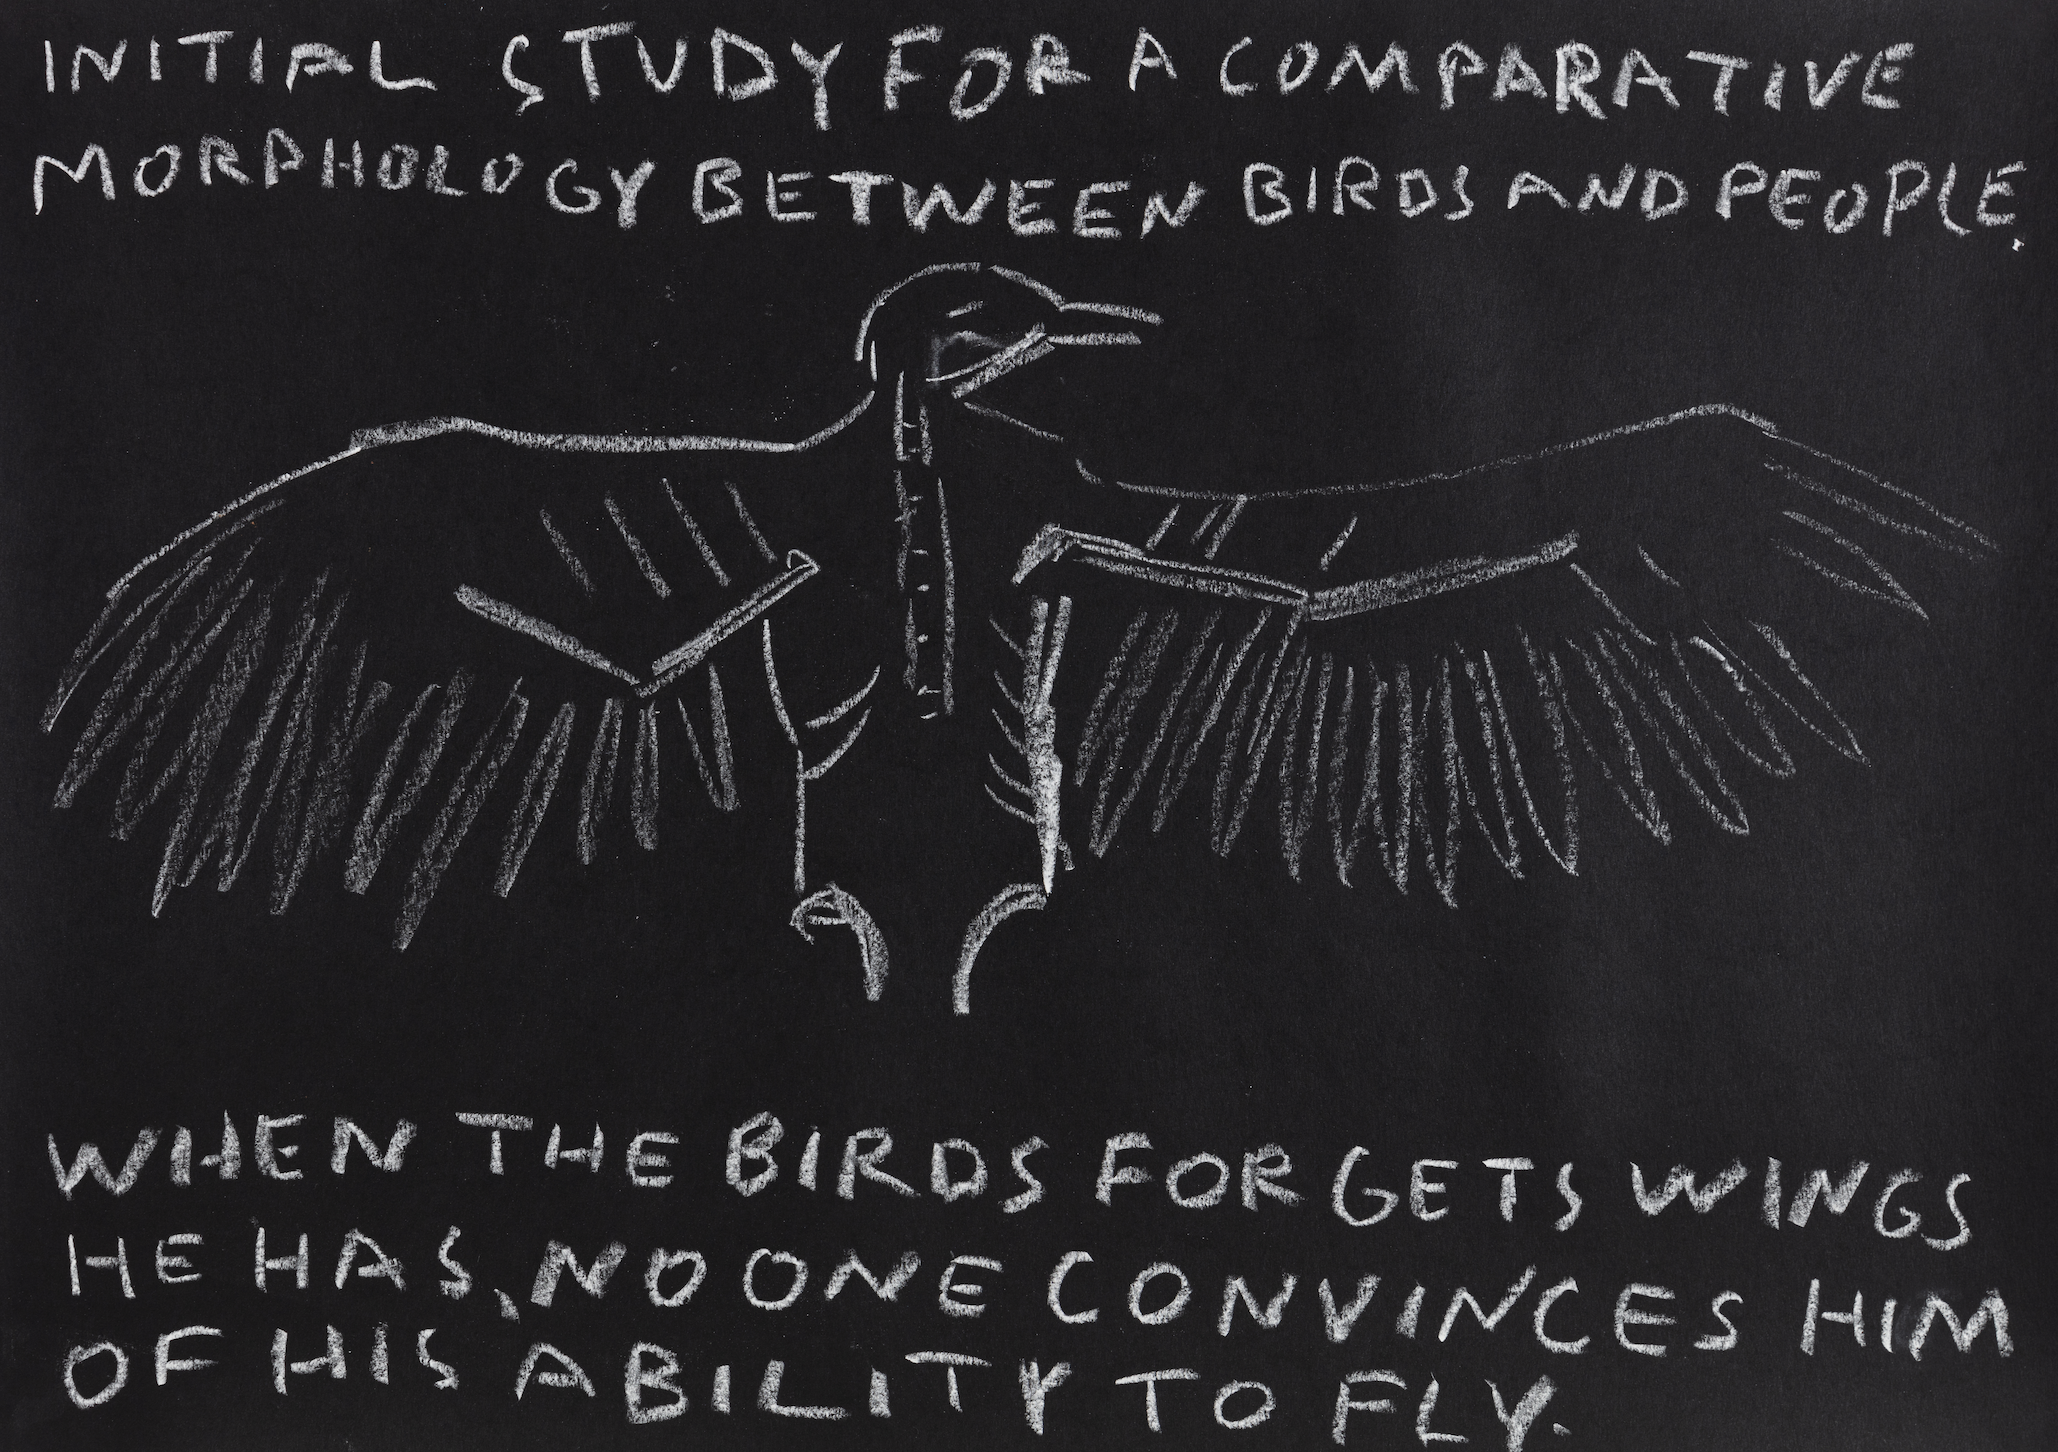 Paulo Nazareth - INITIAL STUDY FOR A COMPARATIVE MORPHOLOGY BETWEEN BIRDS AND PEOPLE [When the birds forgets wings he has no one convinces him of his ability to fly], 2021